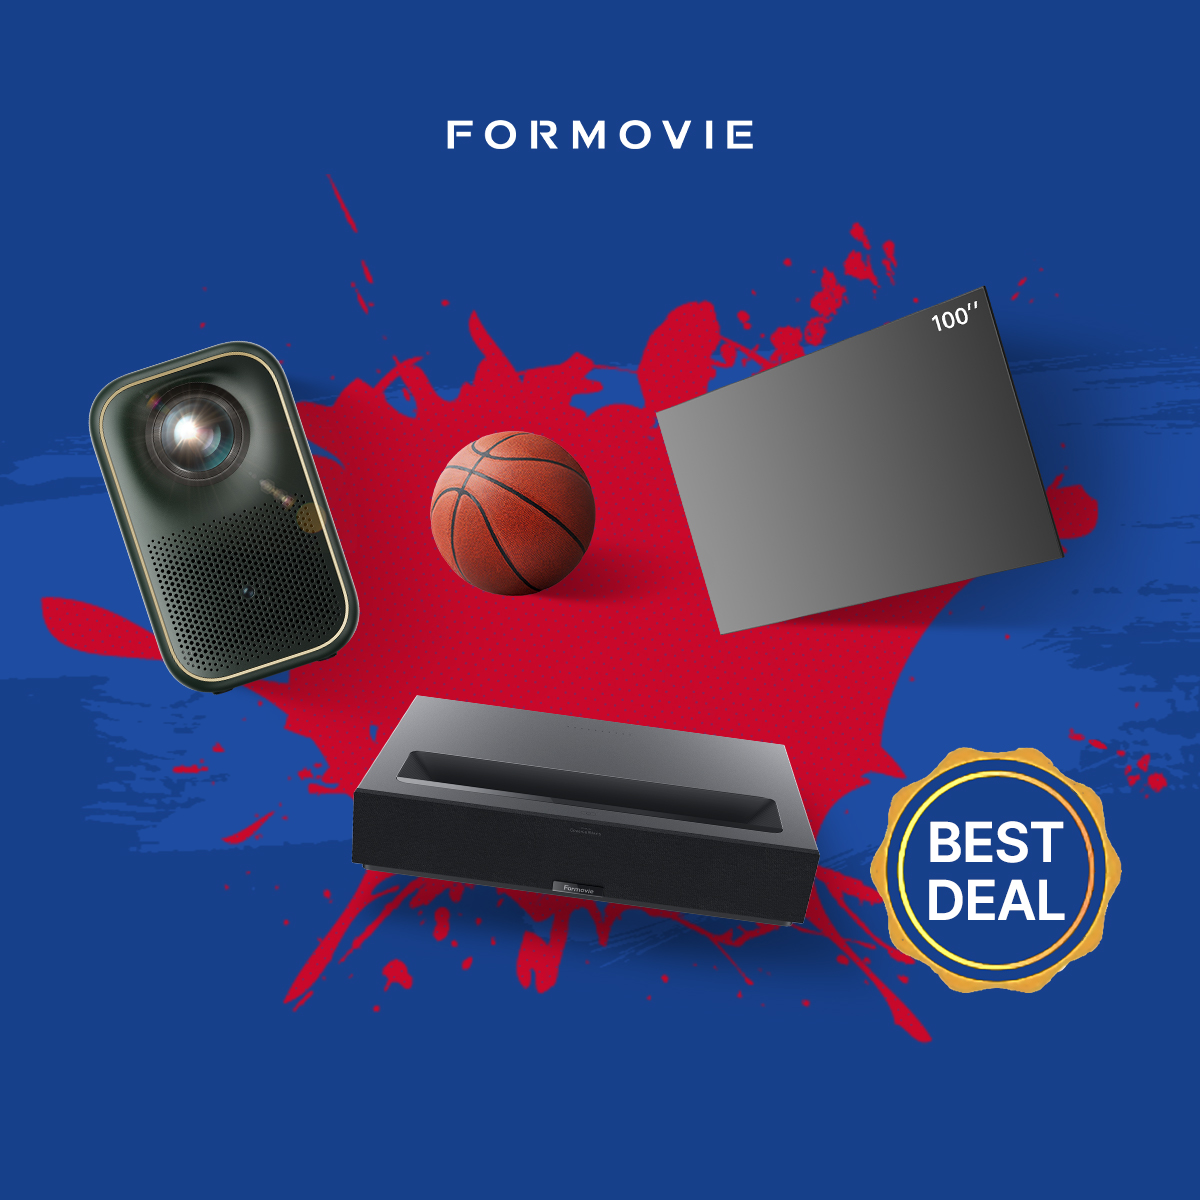 🏀🔥 NBA SLAM DUNK SALE is here! 🔥🏀 Get the best deal ever and save up to $1,000! With Formovie, every pixel brings you closer to the action. 📽️🏆 Don’t miss out—upgrade your viewing experience today! 🛒formovie.com/pages/campaign…